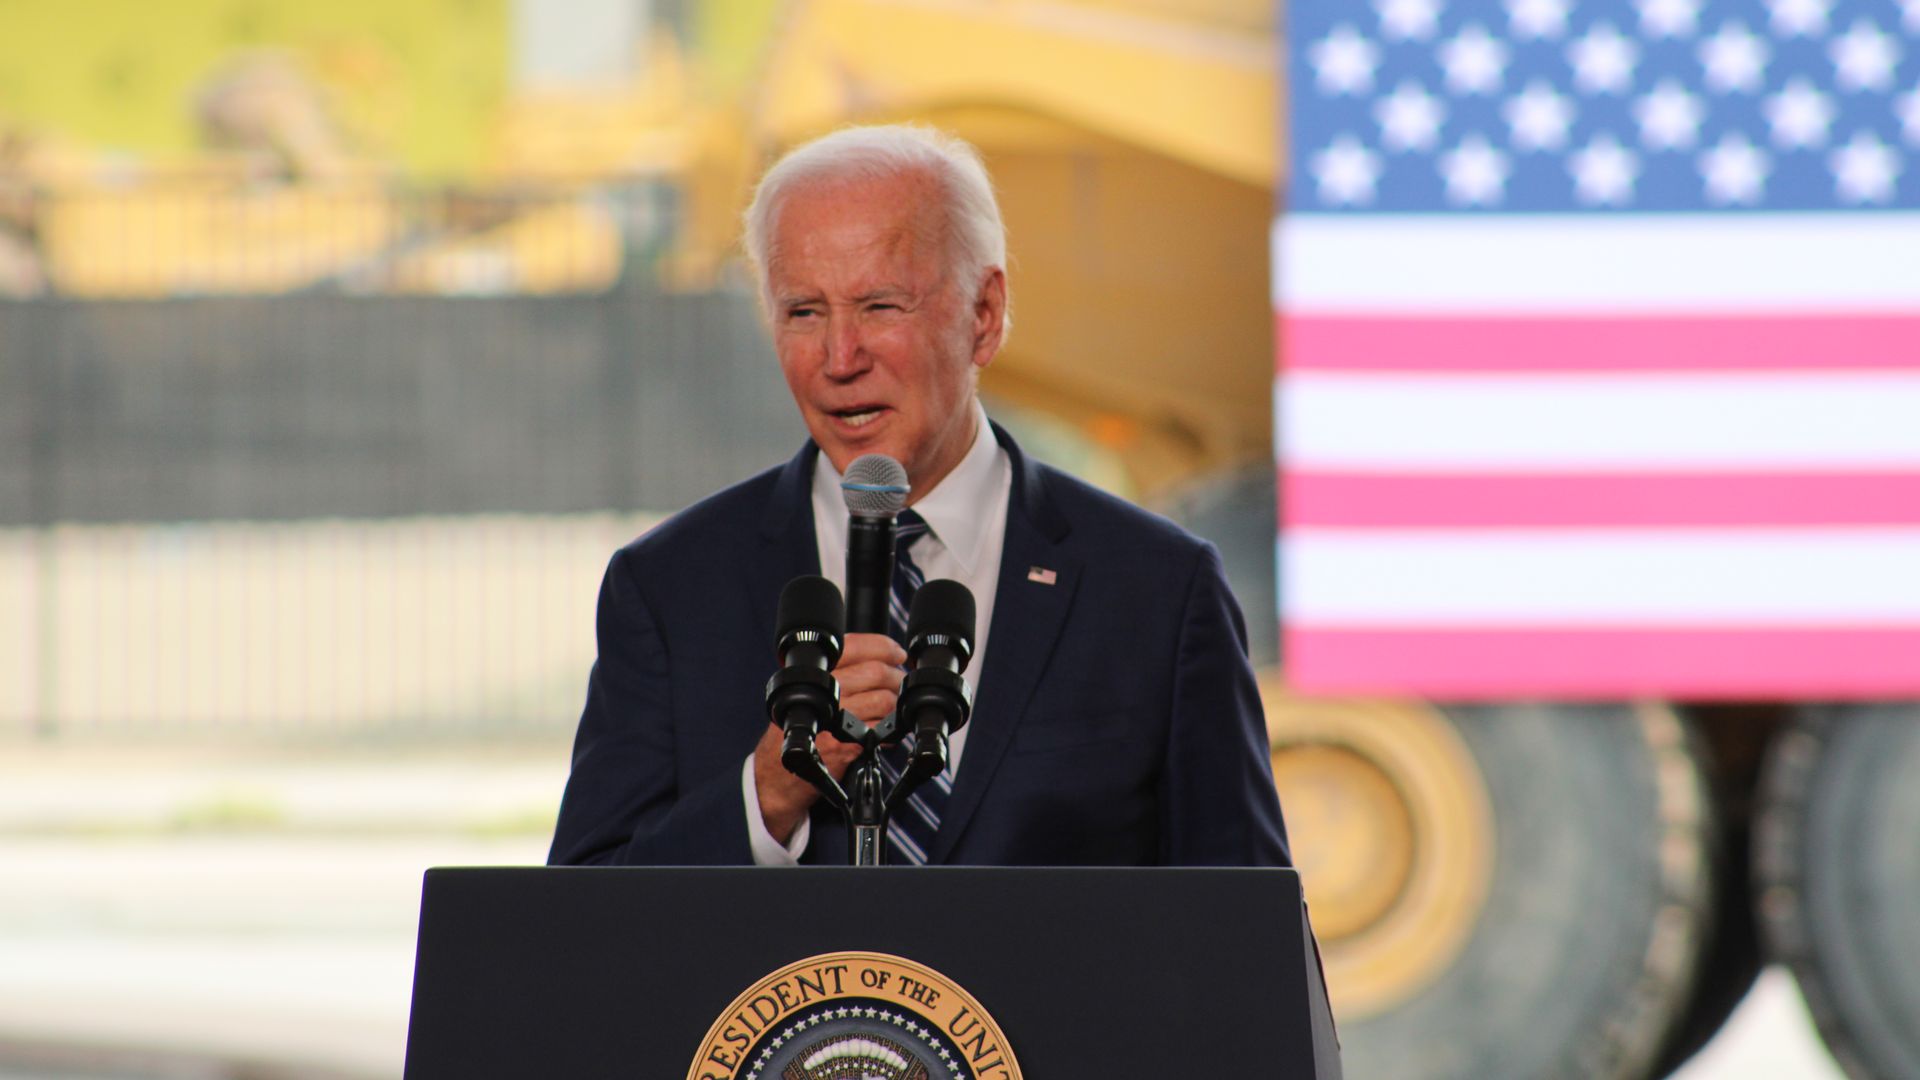 President Biden stands at a lectern speaking into a microphone